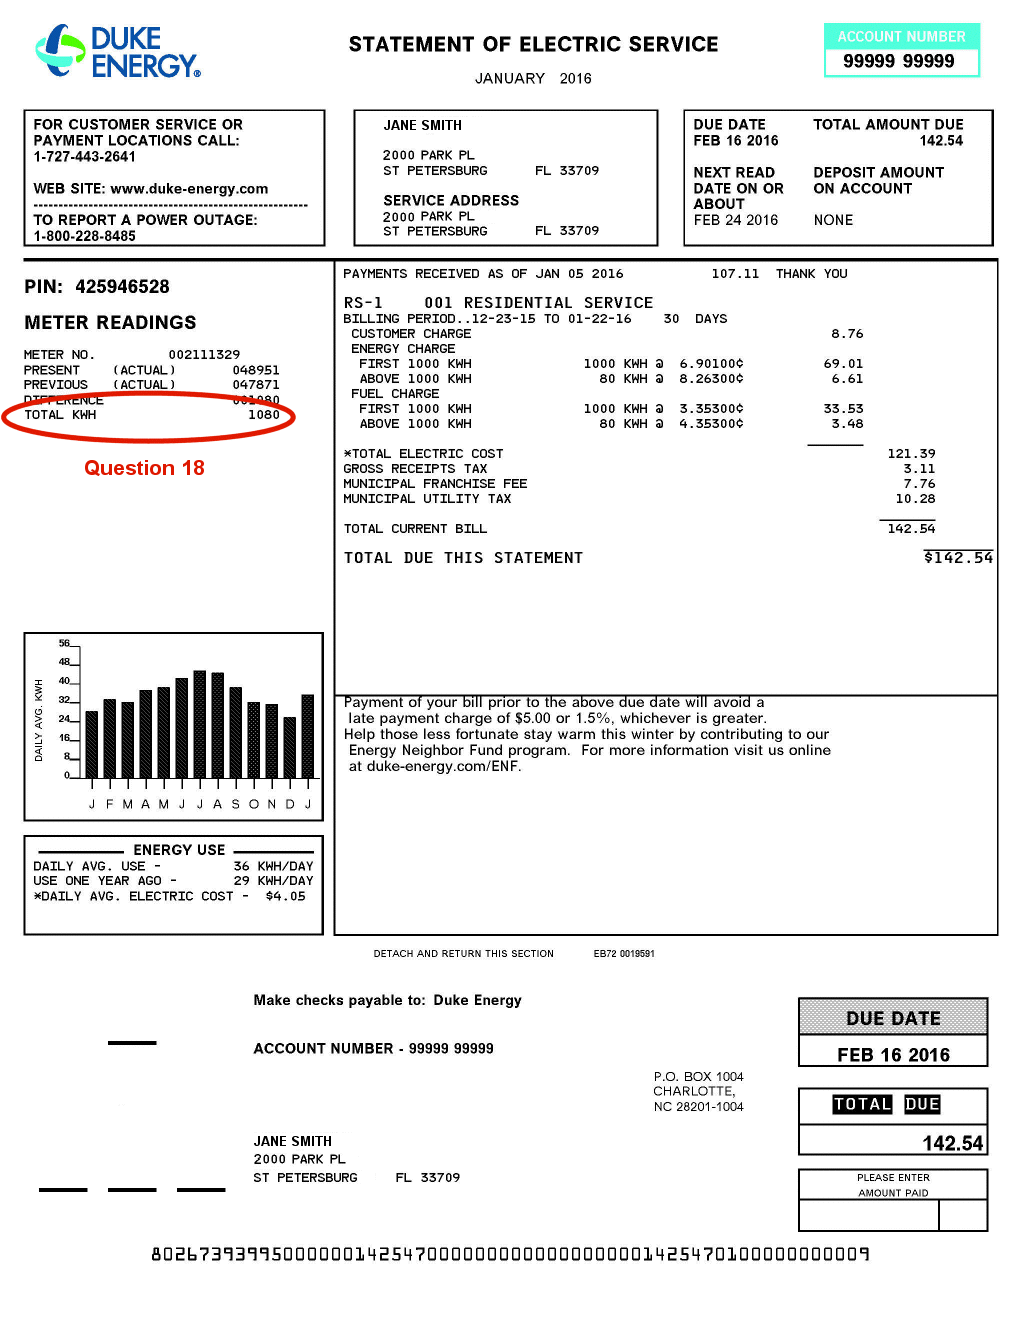 Example electricity bill from Duke Energy